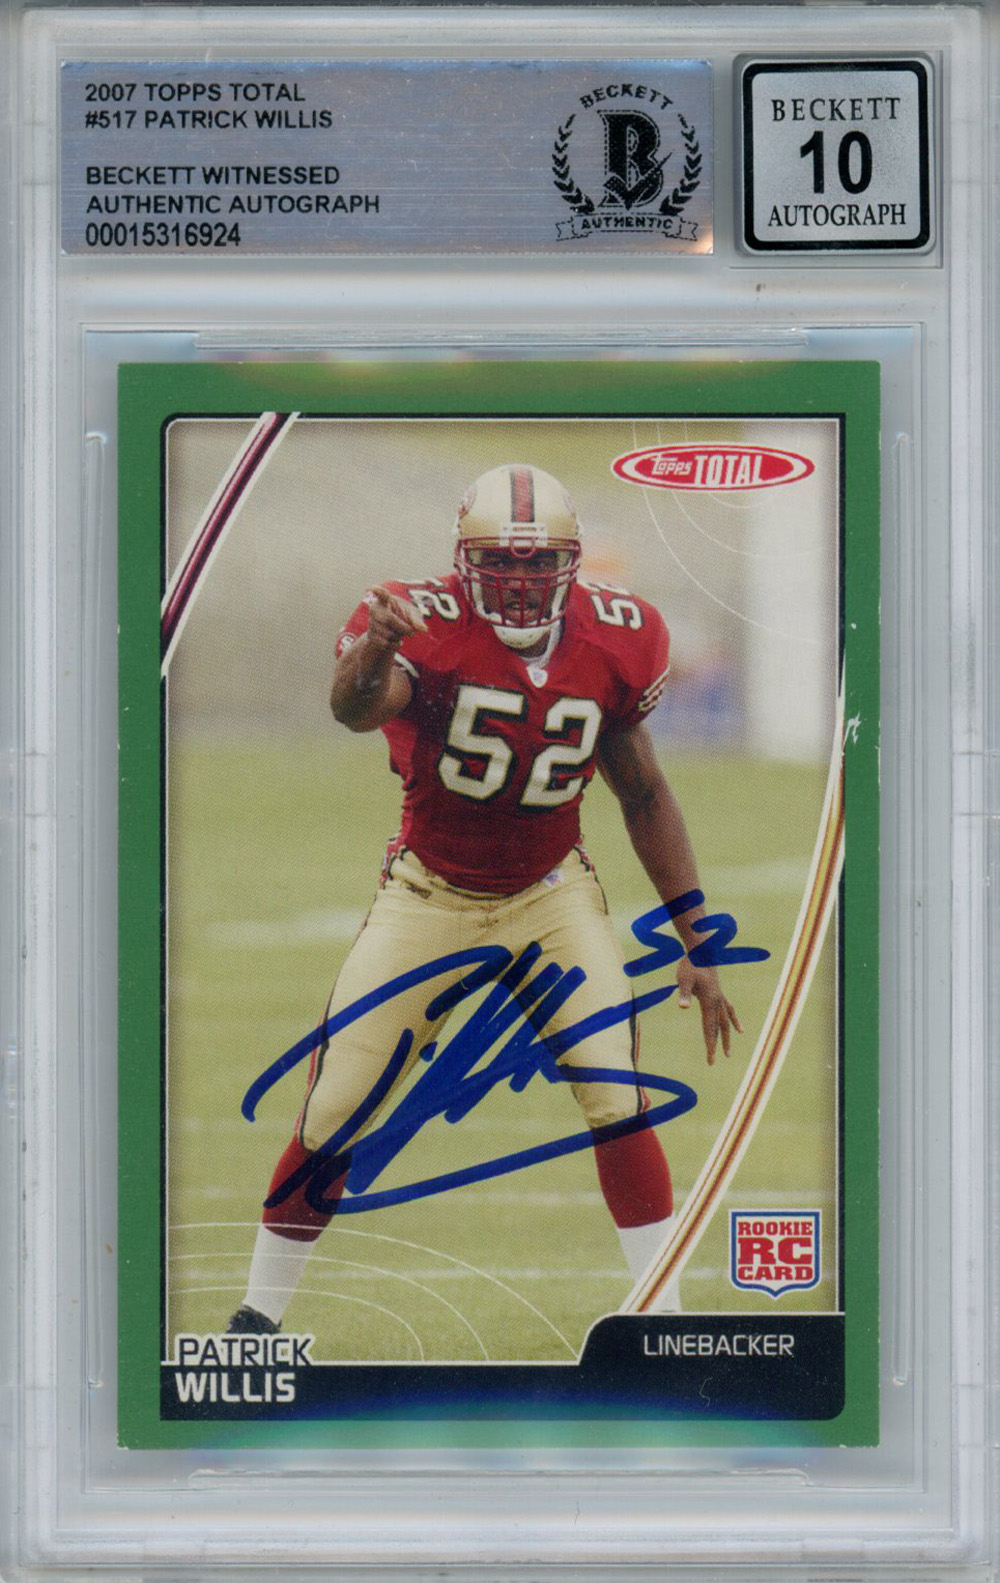 Patrick Willis Signed 2007 Topps Total #517 Rookie Card Beckett 10 Slab